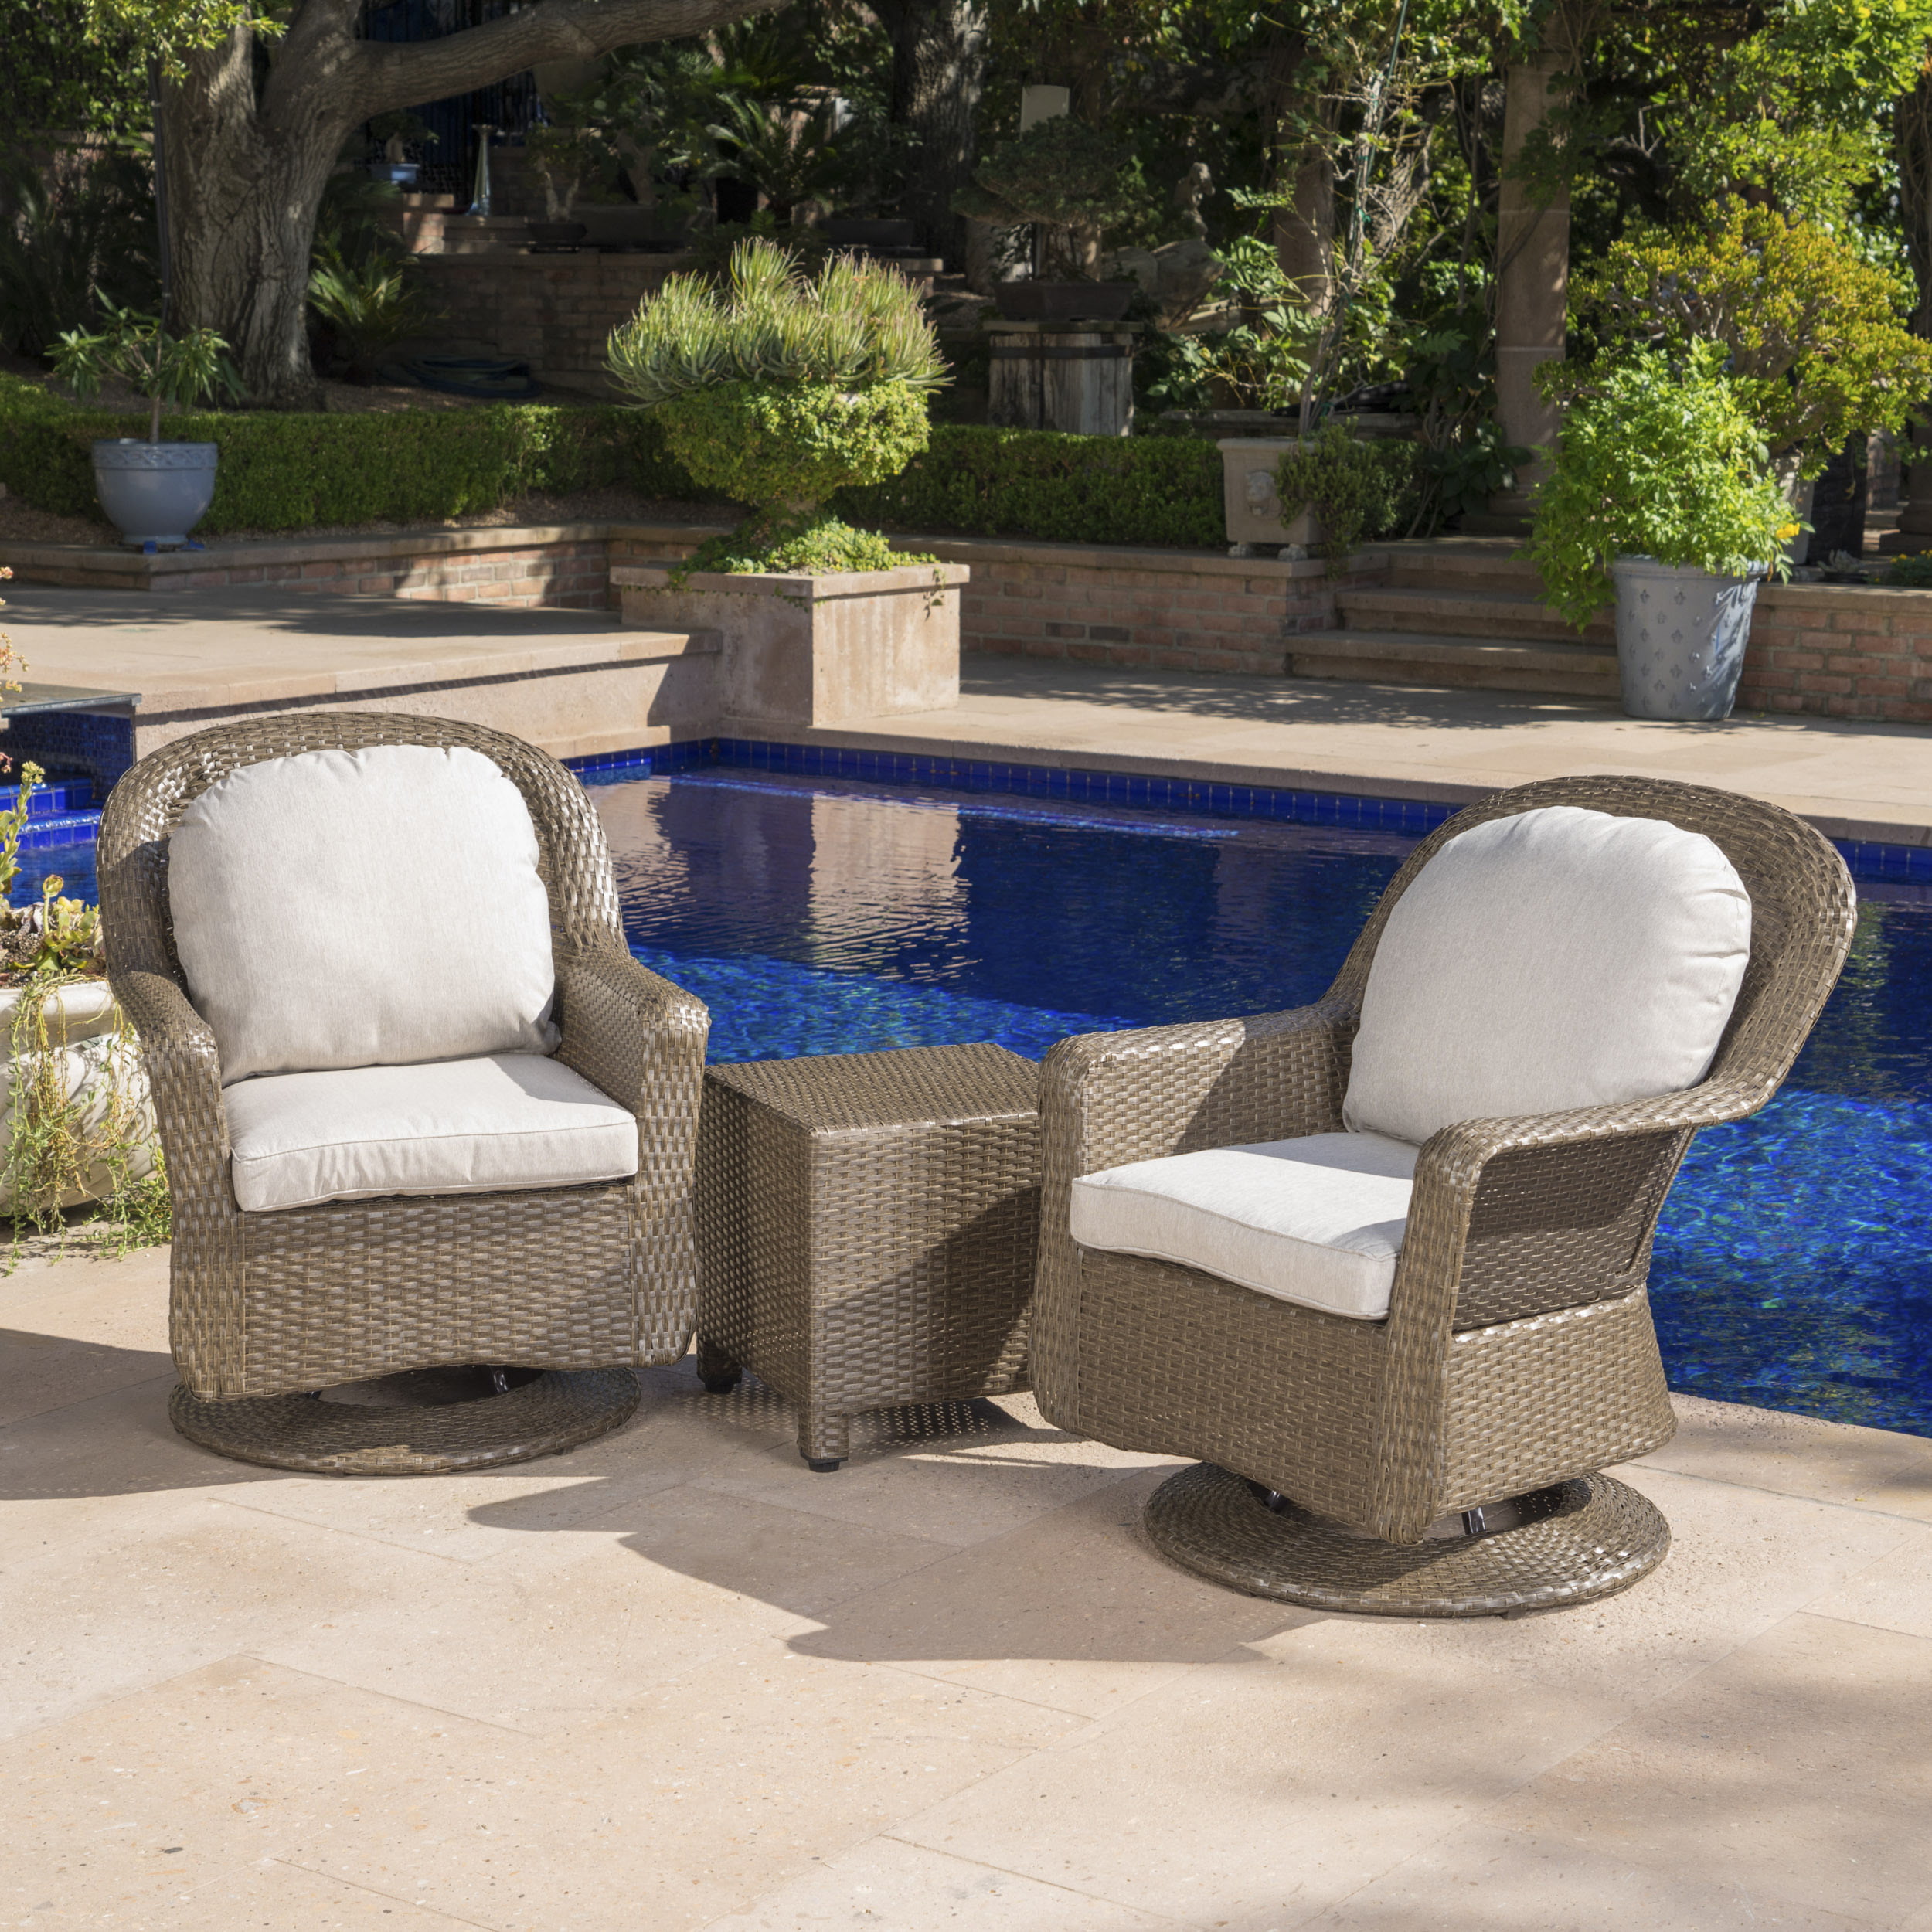 Linsten Outdoor Wicker Swivel Club Chairs and Side Table Set with Water